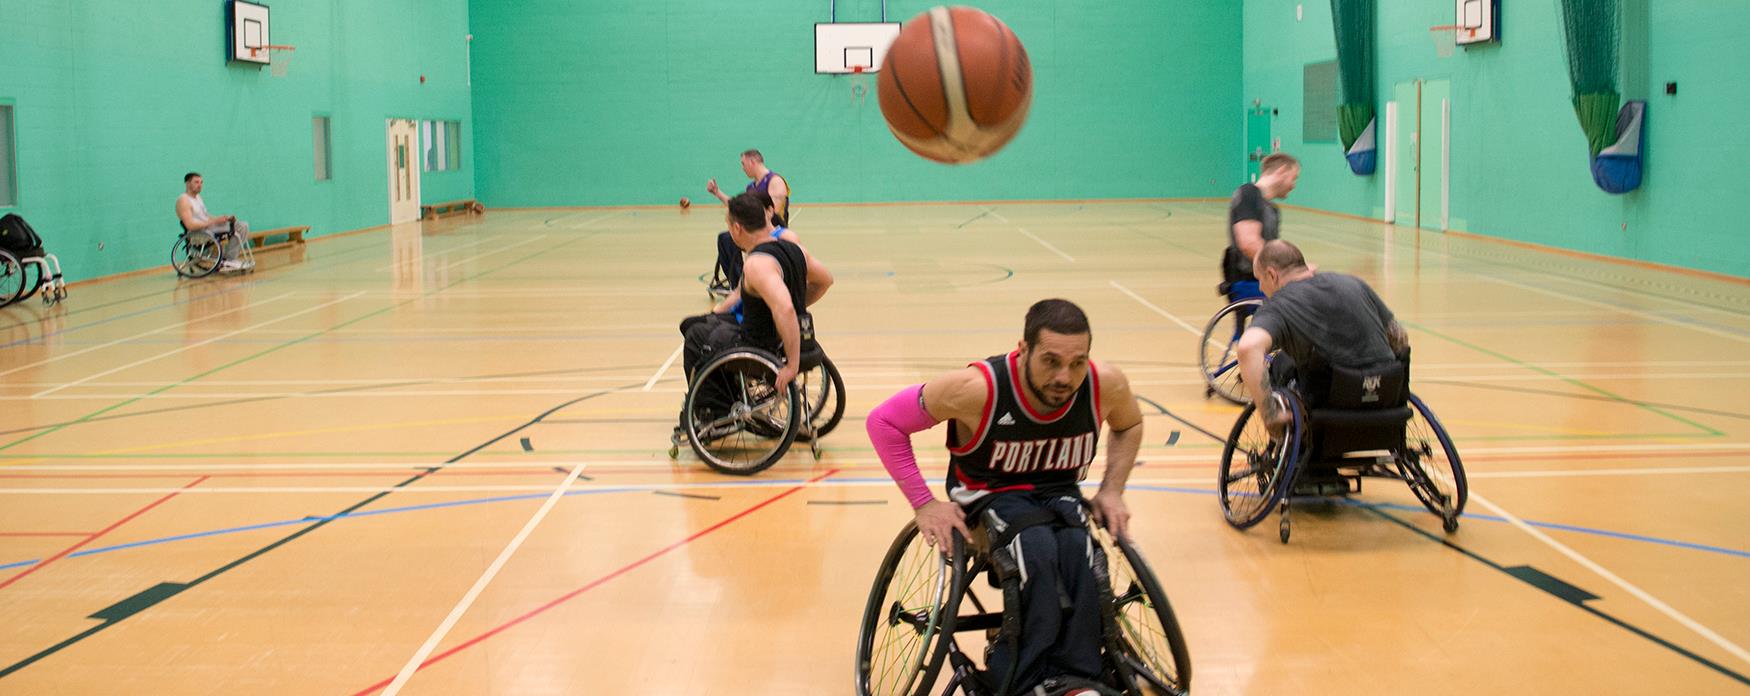 A wheelchair basketball game being played at Blackwater Leisure Centre.